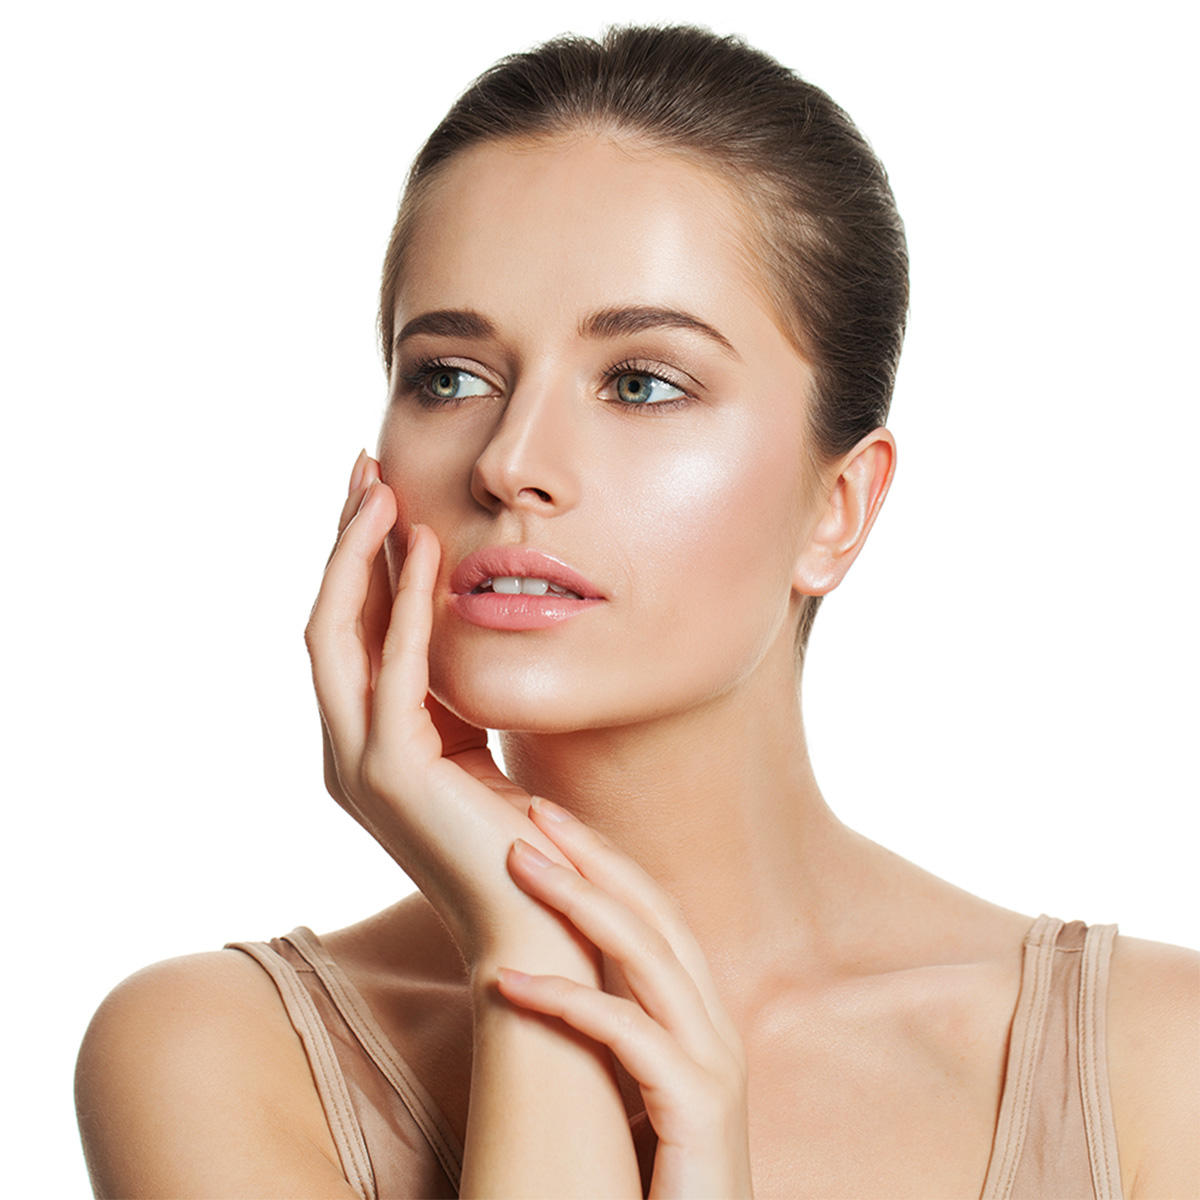 Cosmetic dermatology in NYC uses advanced treatments to improve the appearance, tone, and texture of the skin. We are proud to offer innovative cosmetic dermatology procedures, including chemical peels, PRP skin therapy, microneedling, sclerotherapy, photorejuvenation treatments, and PRP hair restoration.